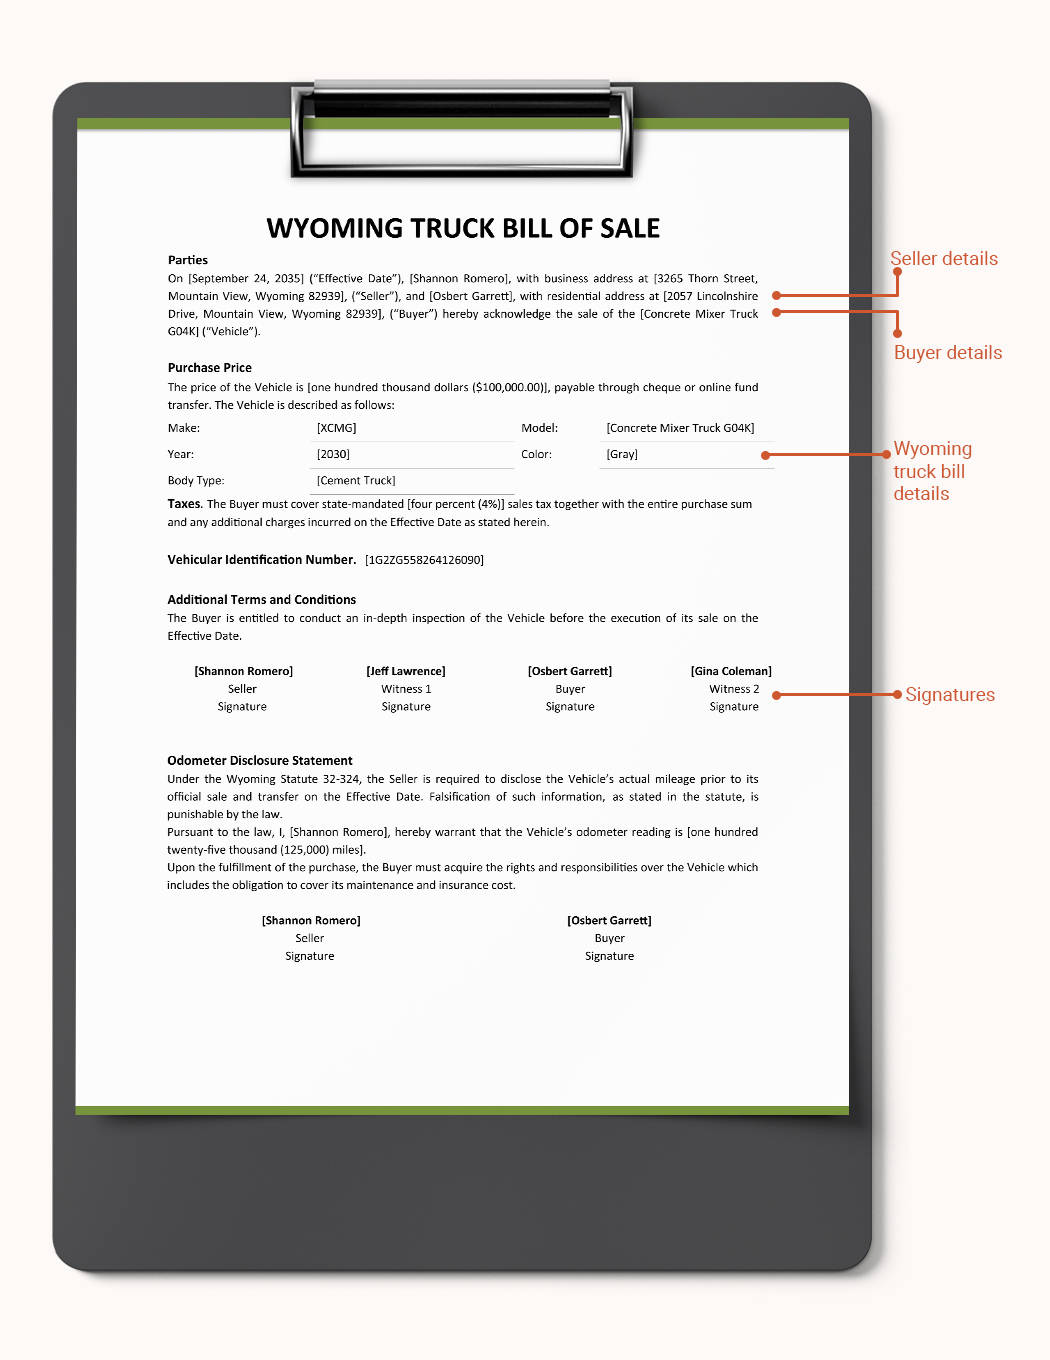 Wyoming Truck Bill Of Sale Template